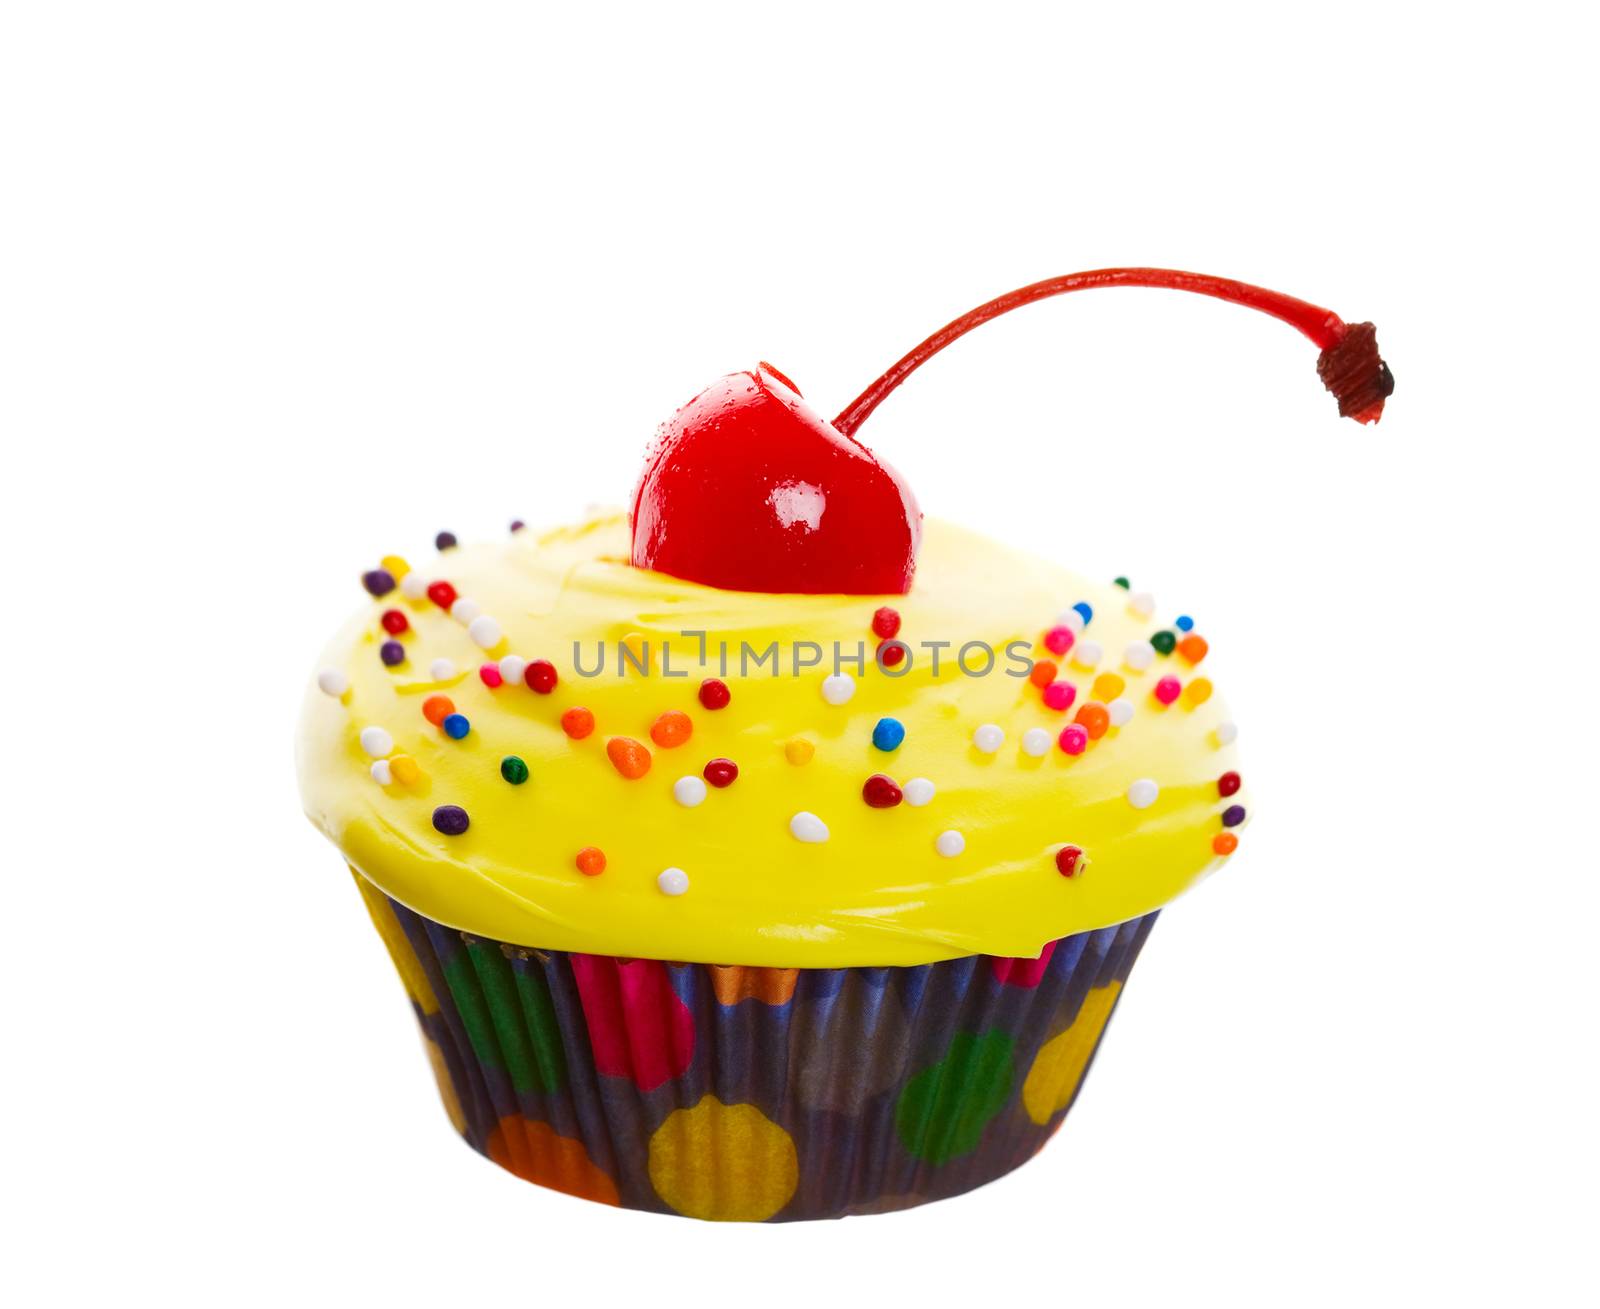 Delectable yellow cupcake topped with a cherry and multi-colored sprinkles.  Shot on white background.  Wide angle view.